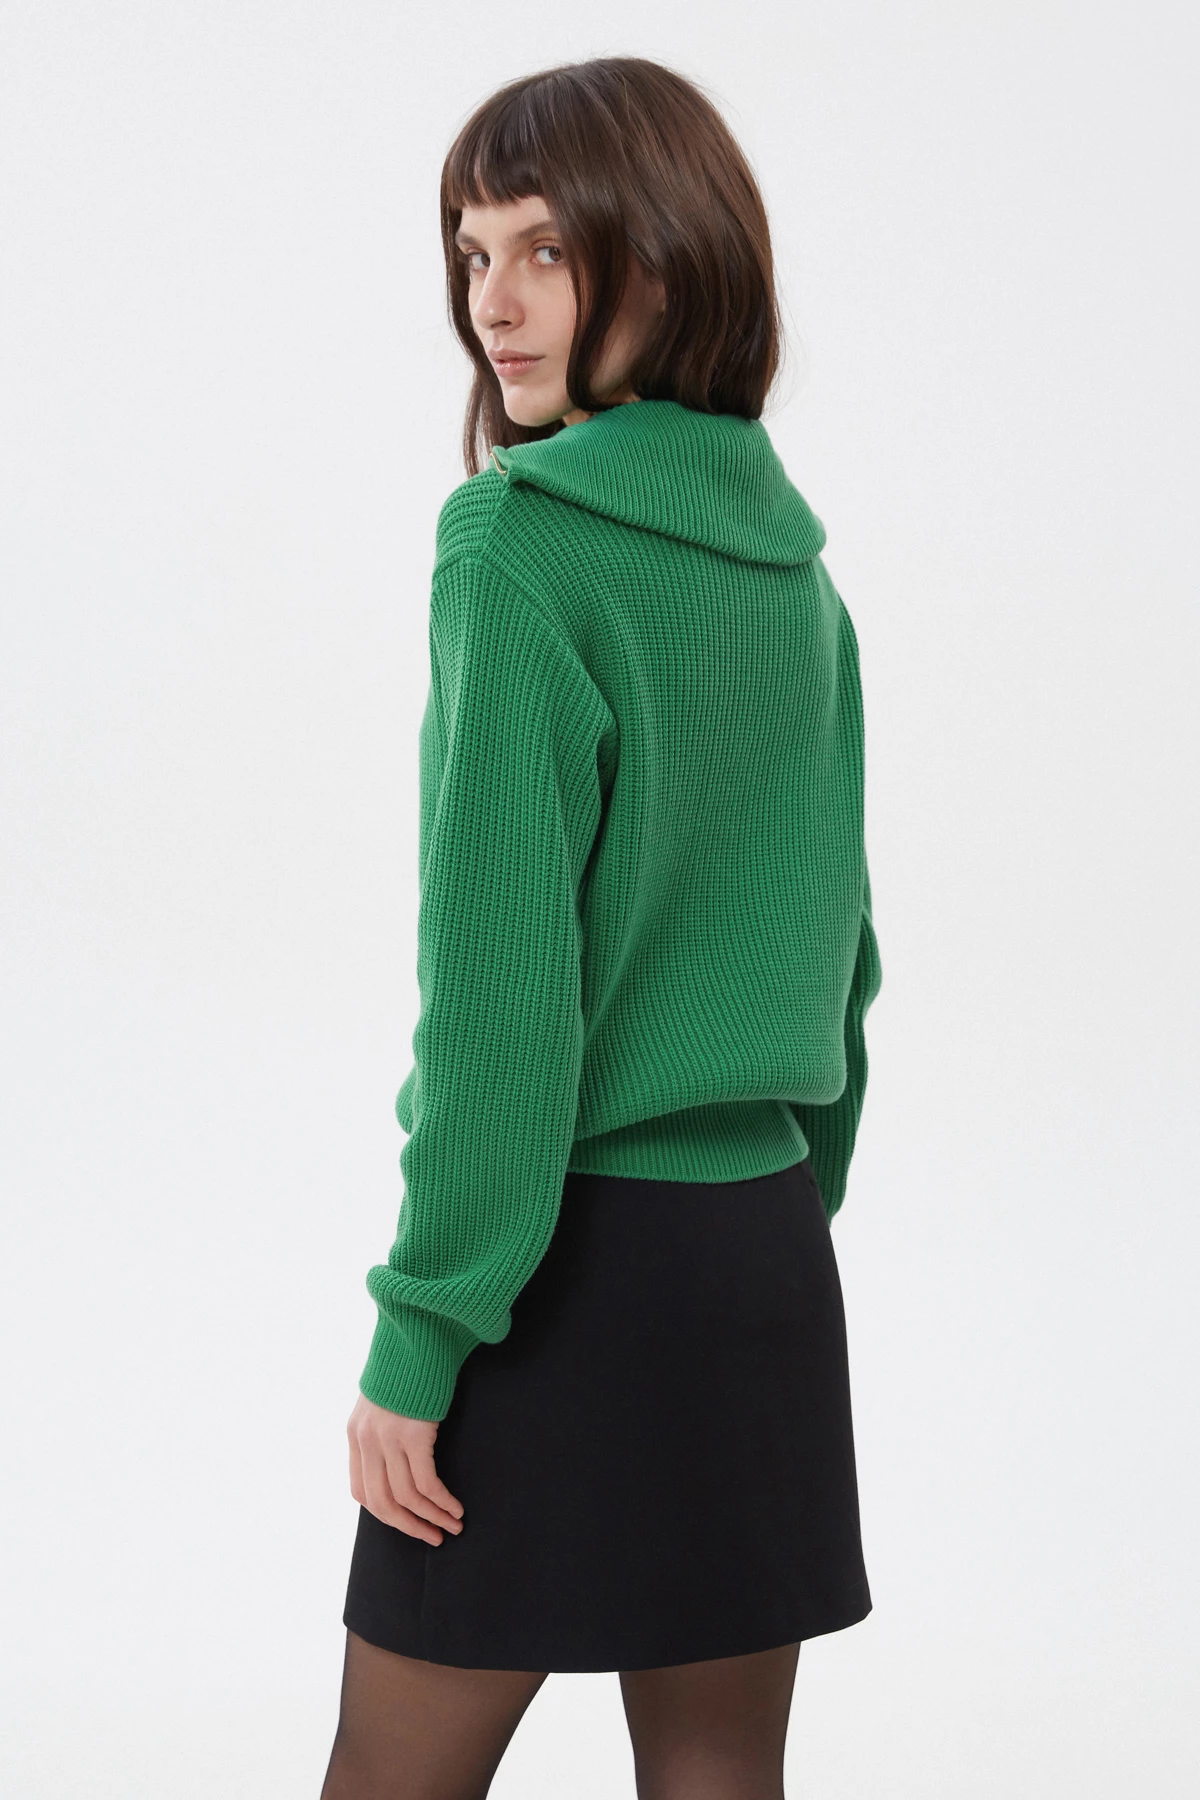 Green cotton zip-up knit sweater, photo 5